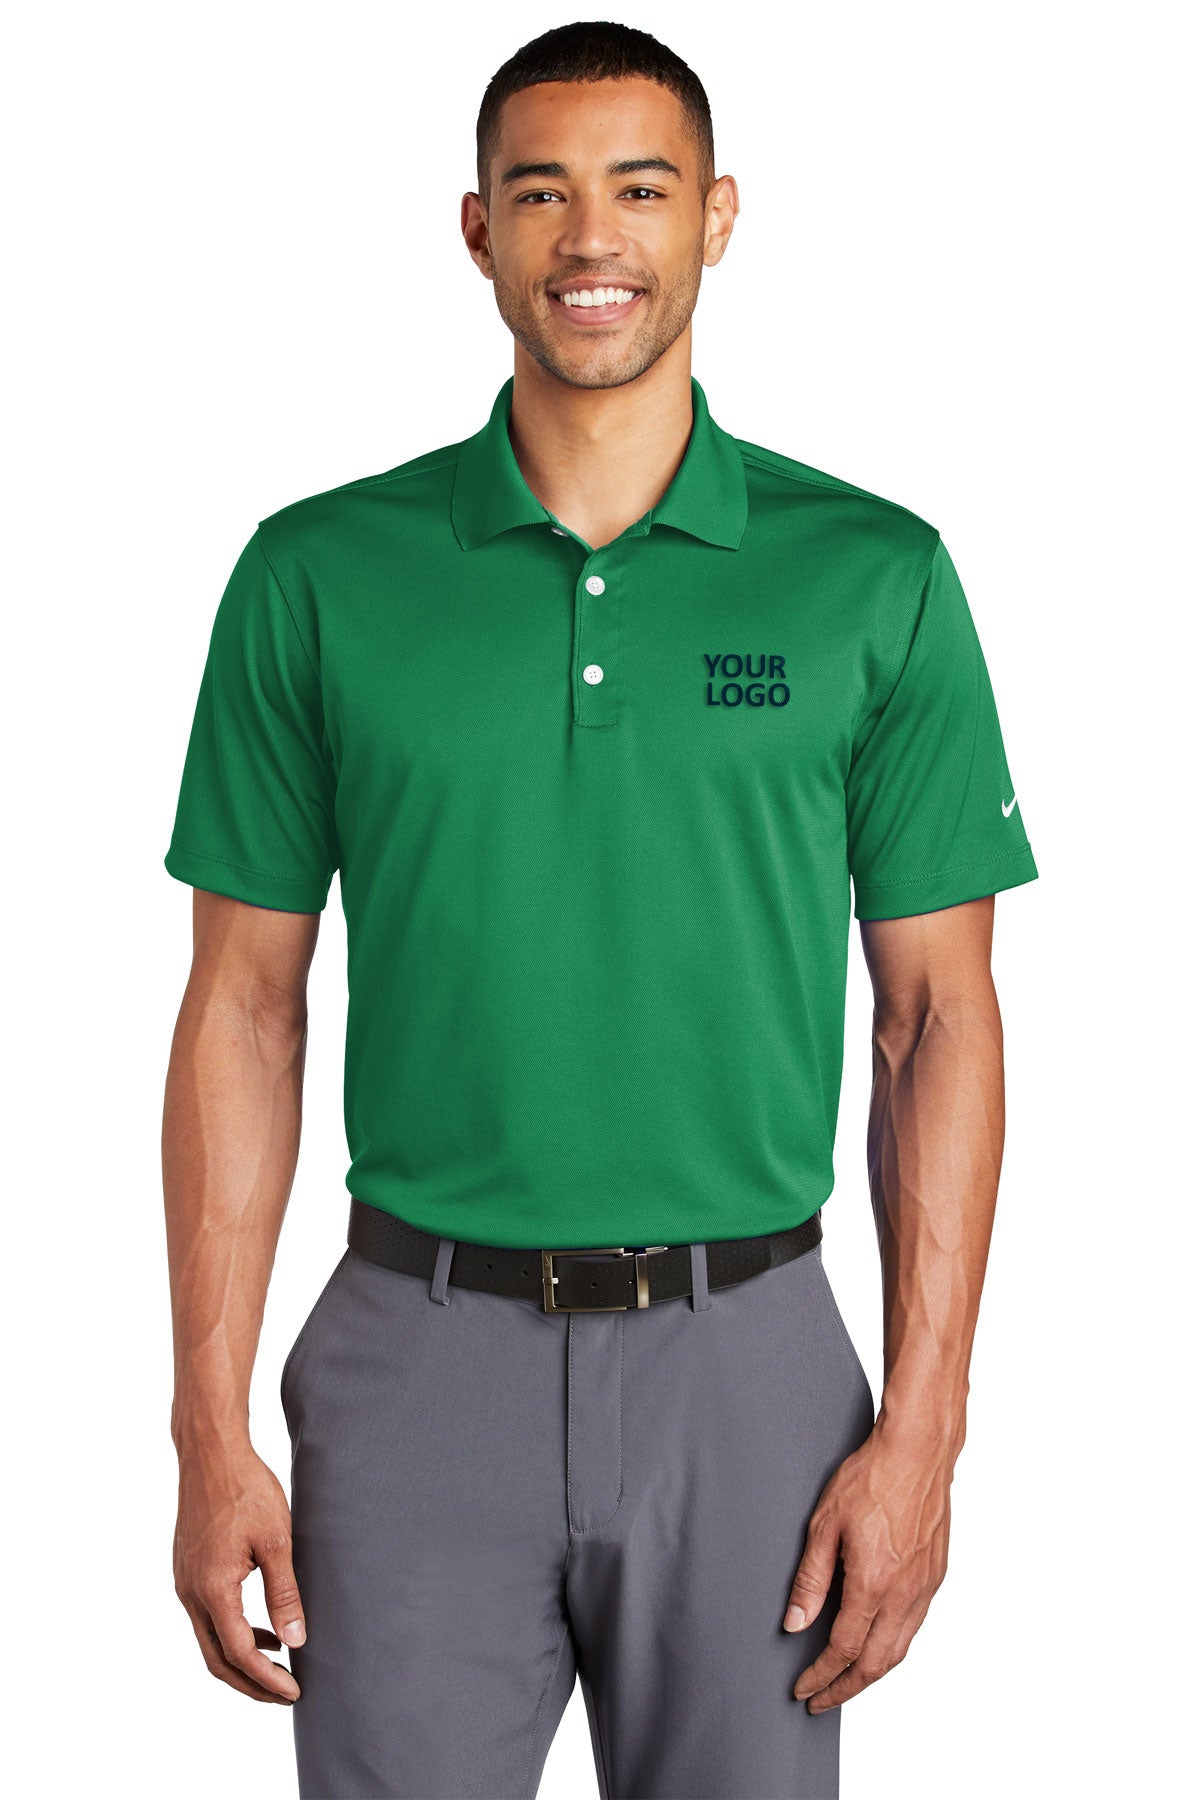 nike lucky green 203690 work polo shirts with logo